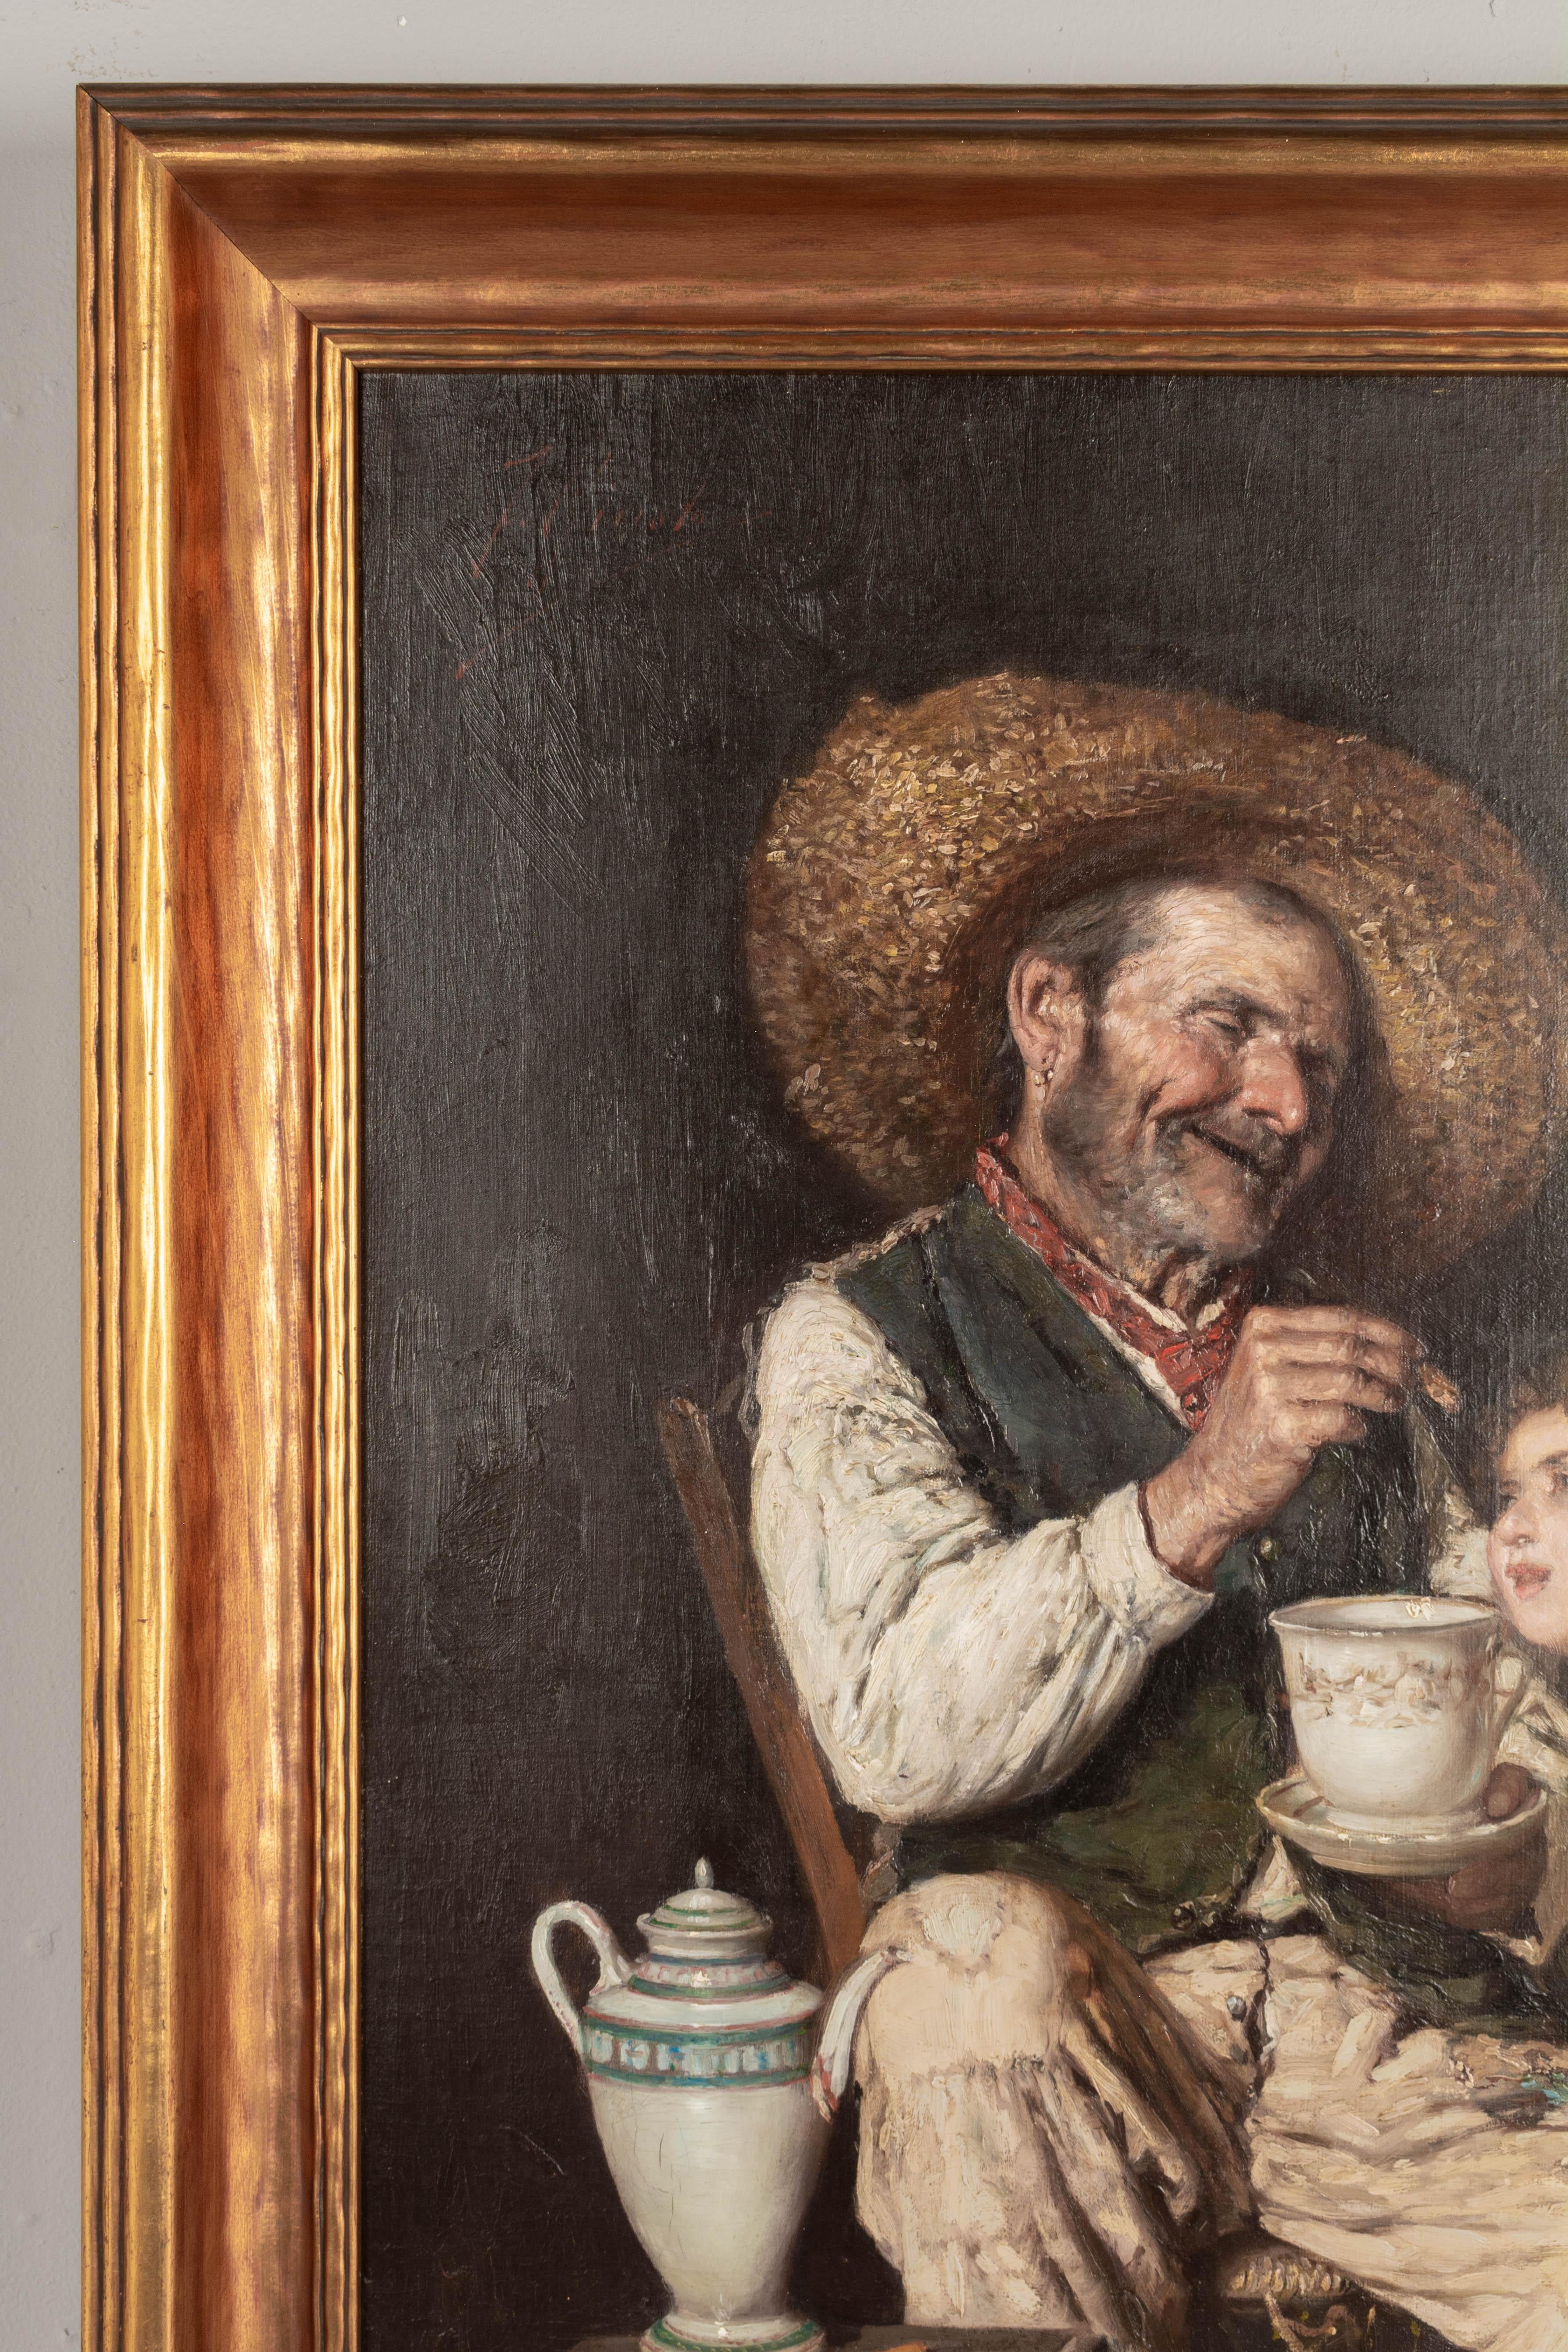 A charming portrait of an old man and small child with coffee and biscuits by Italian artist Fausto Giusto (1867 Naples-1941 Zurich). Impressionist style with nice details and brushwork. Signed upper left: F. Giusto. Oil on canvas. Giltwood frame.